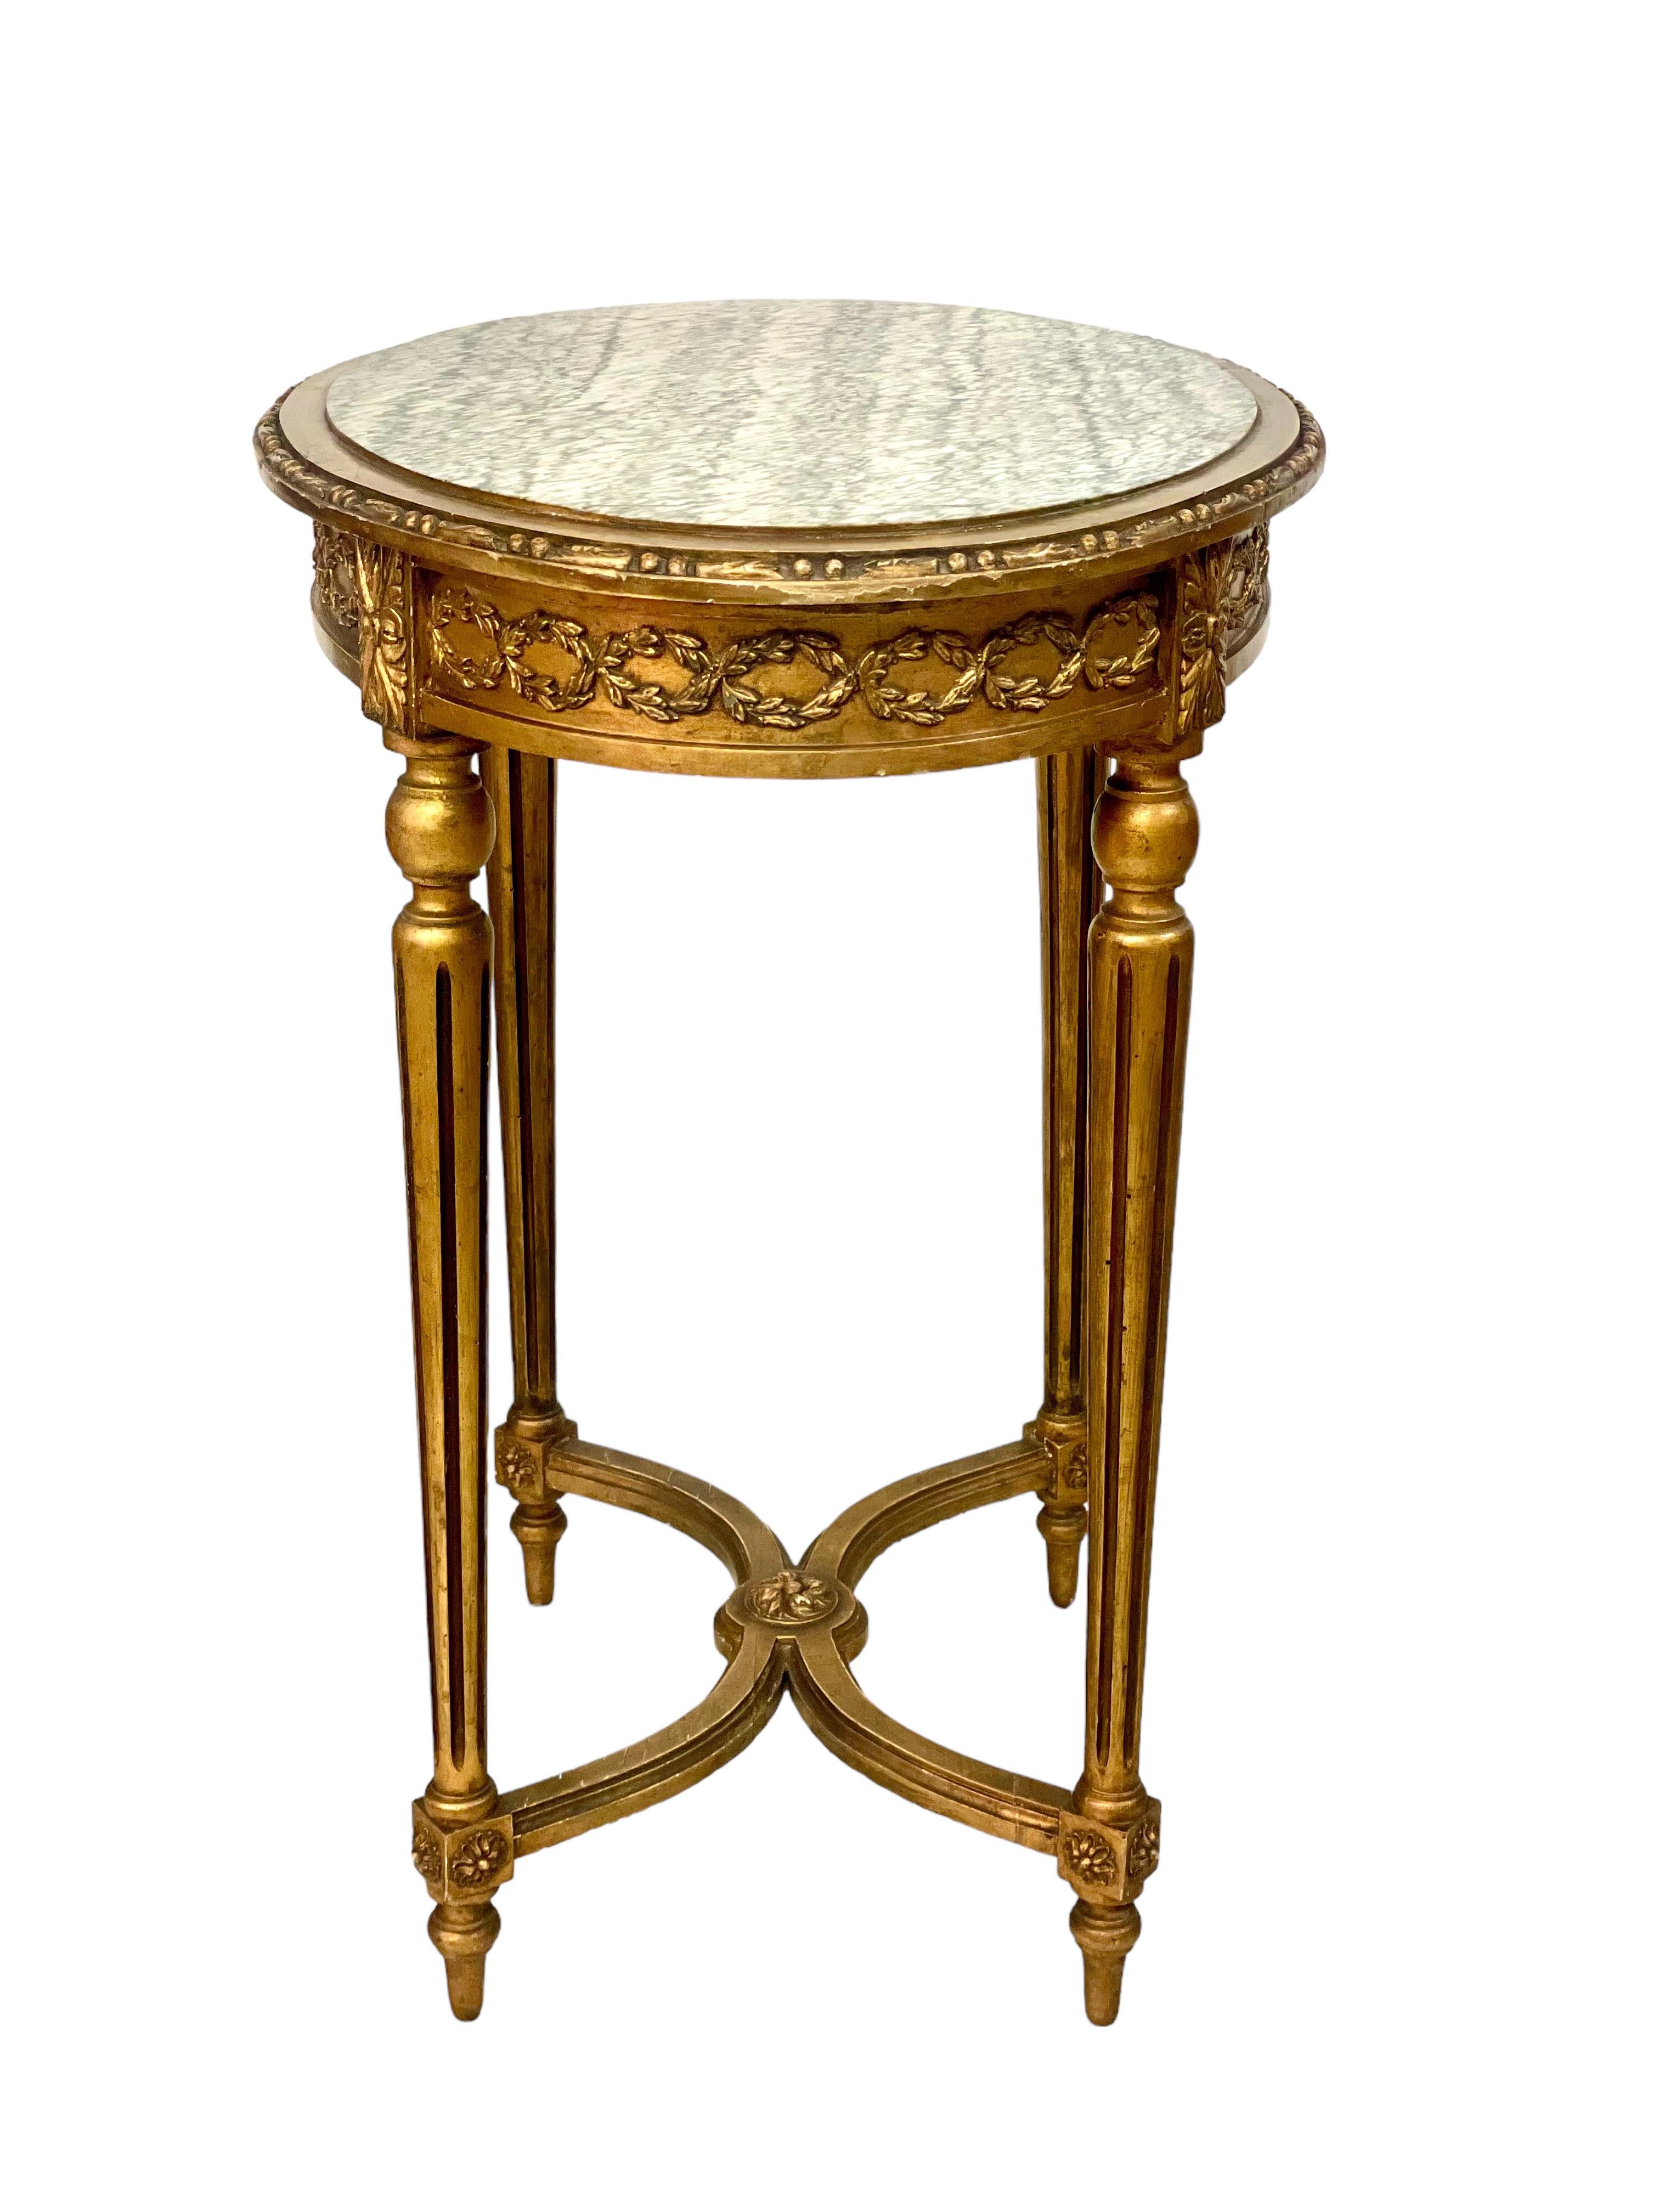 19th Century French Louis XVI Gilt Center Table with Marble Top For Sale 1